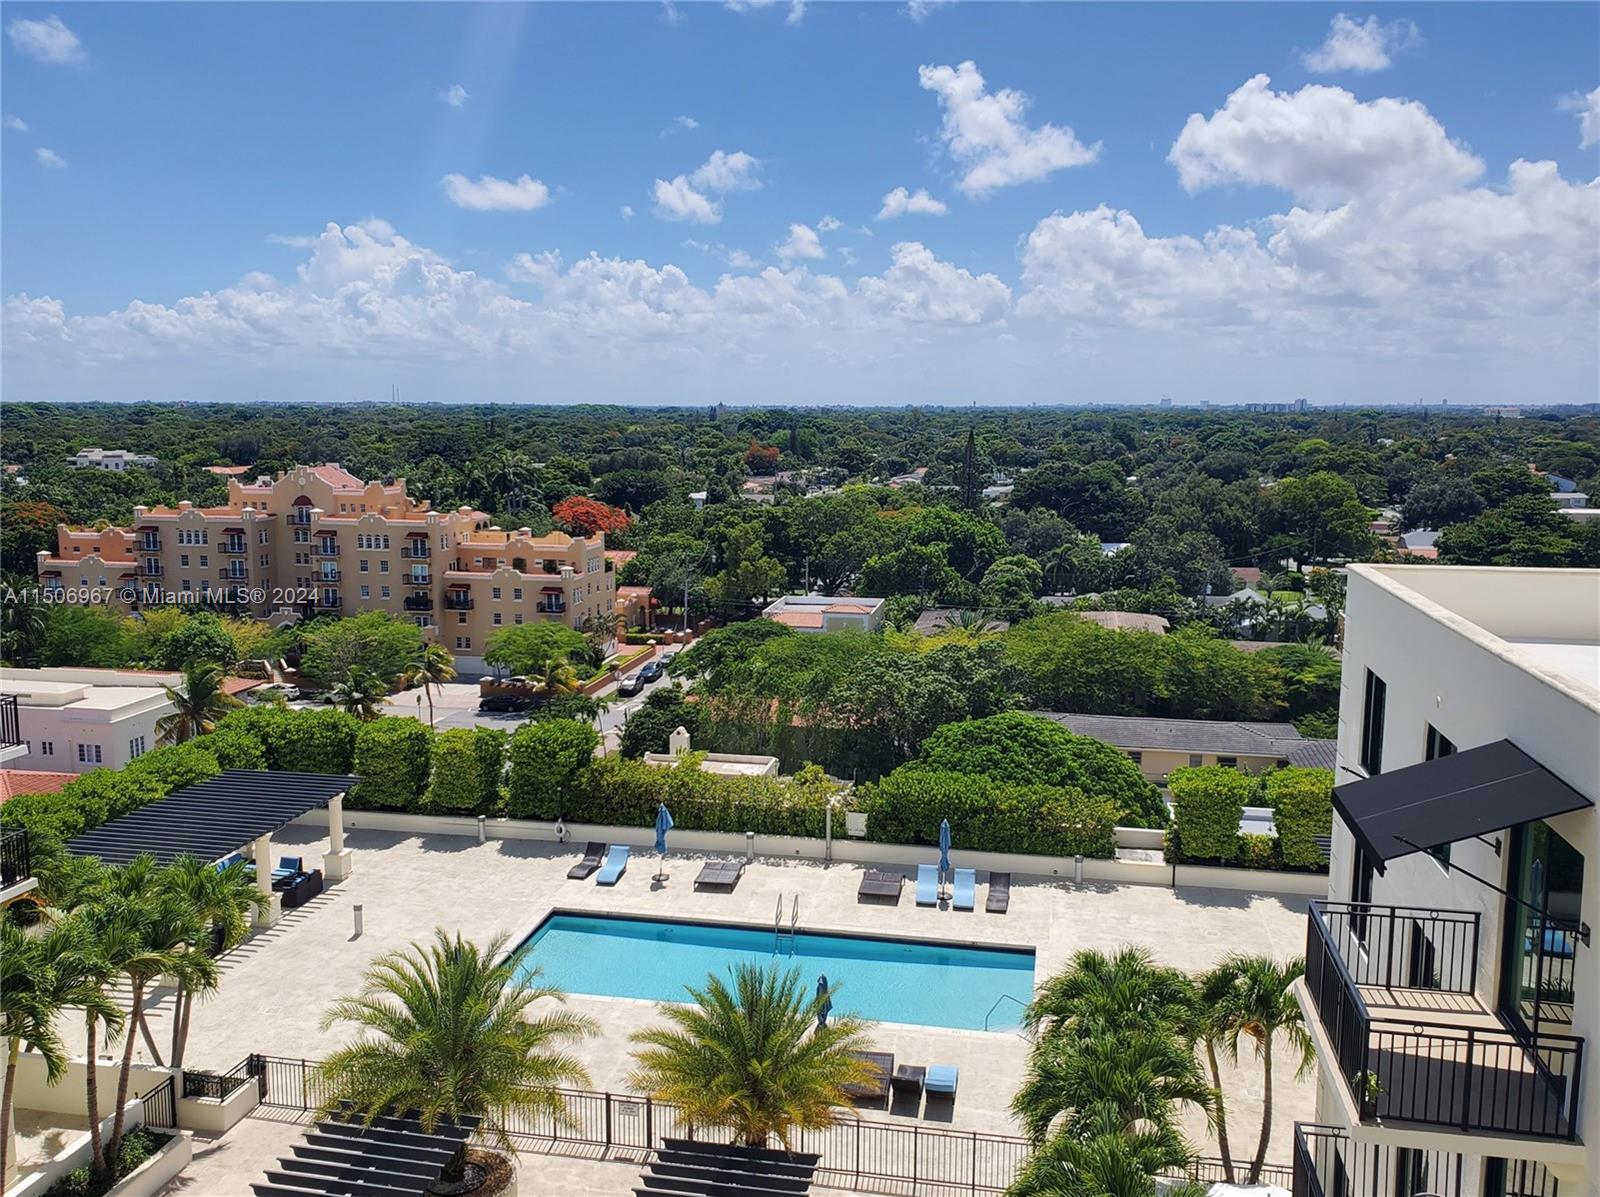 Beautiful furnished Condo in the heart of Coral Gables conveniently located minutes away from Miracle Mile restaurants, shops, and businesses, Urban Life At Its Best. Spacious unit offers 2 bedrooms and 2 baths, 2 parking spaces side by side and beautiful views. Amenities include Concierge, great room, fitness center, beautiful pool, and lounge area. Unit furnished by TUI Lifestyle. Deposits, first and last month, security deposit. Building requires a common area deposit equal to 1 month rent. Unit available immediately.